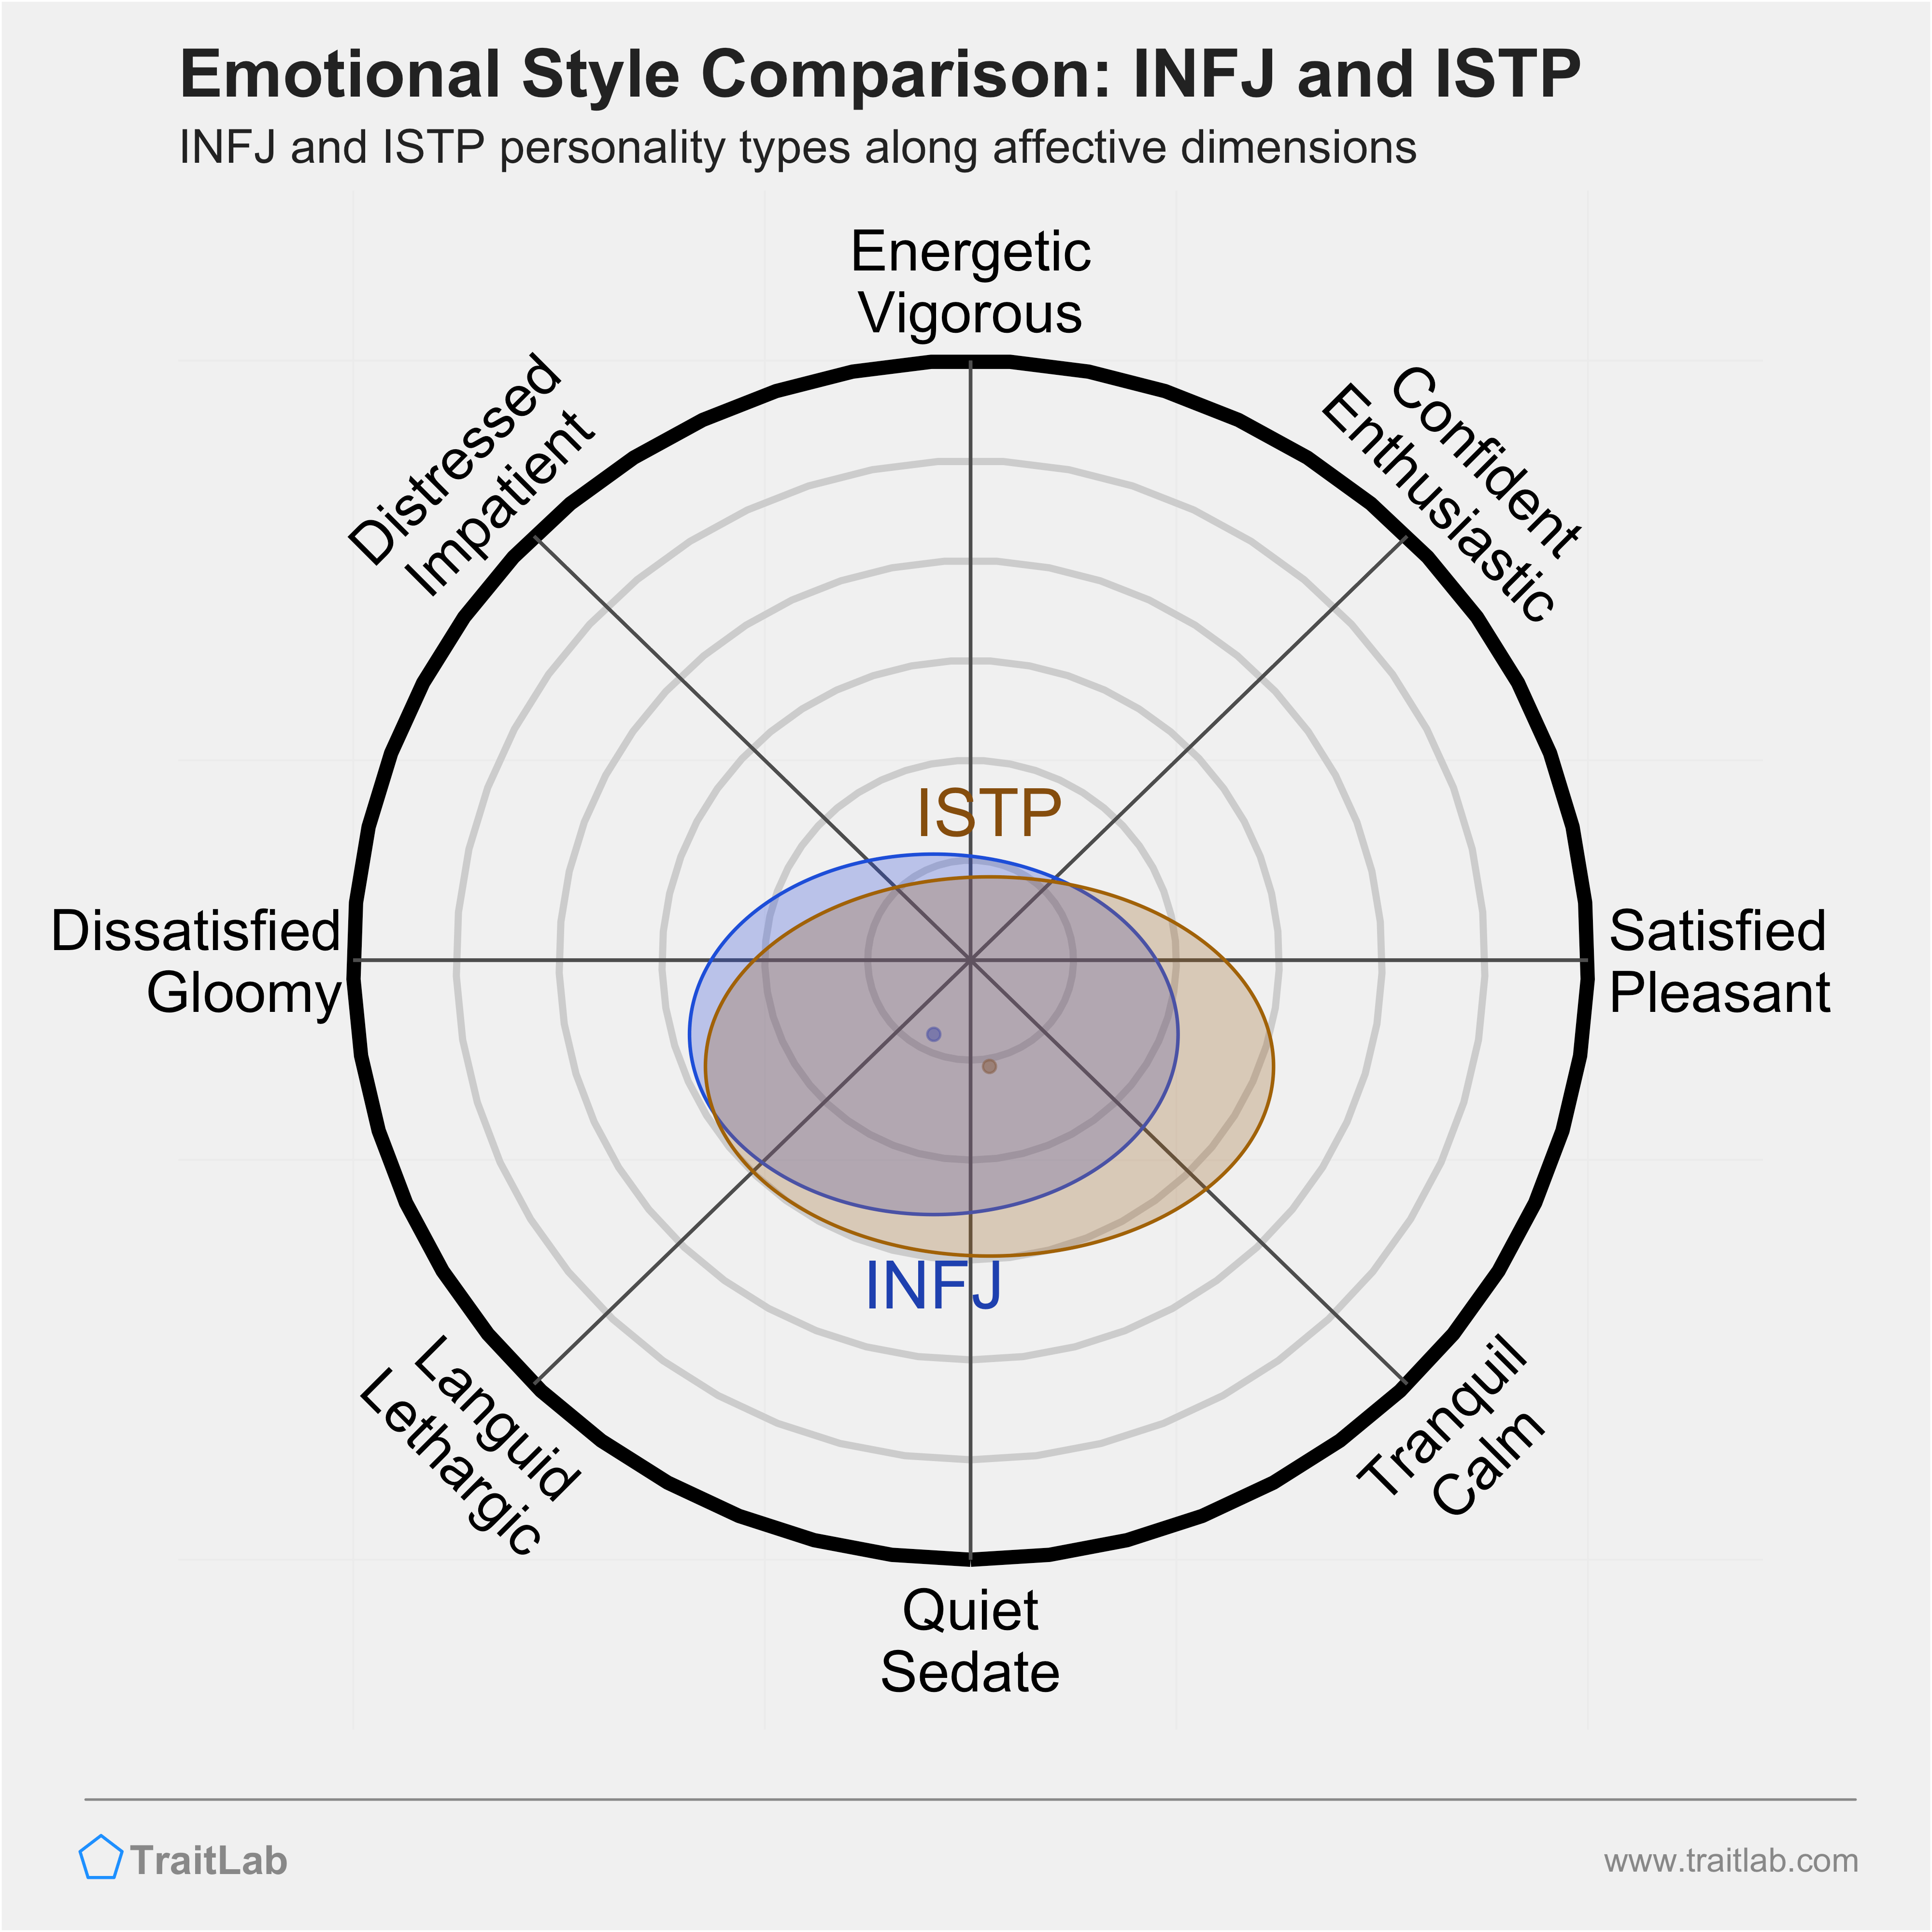 INFJ and ISTP comparison across emotional (affective) dimensions